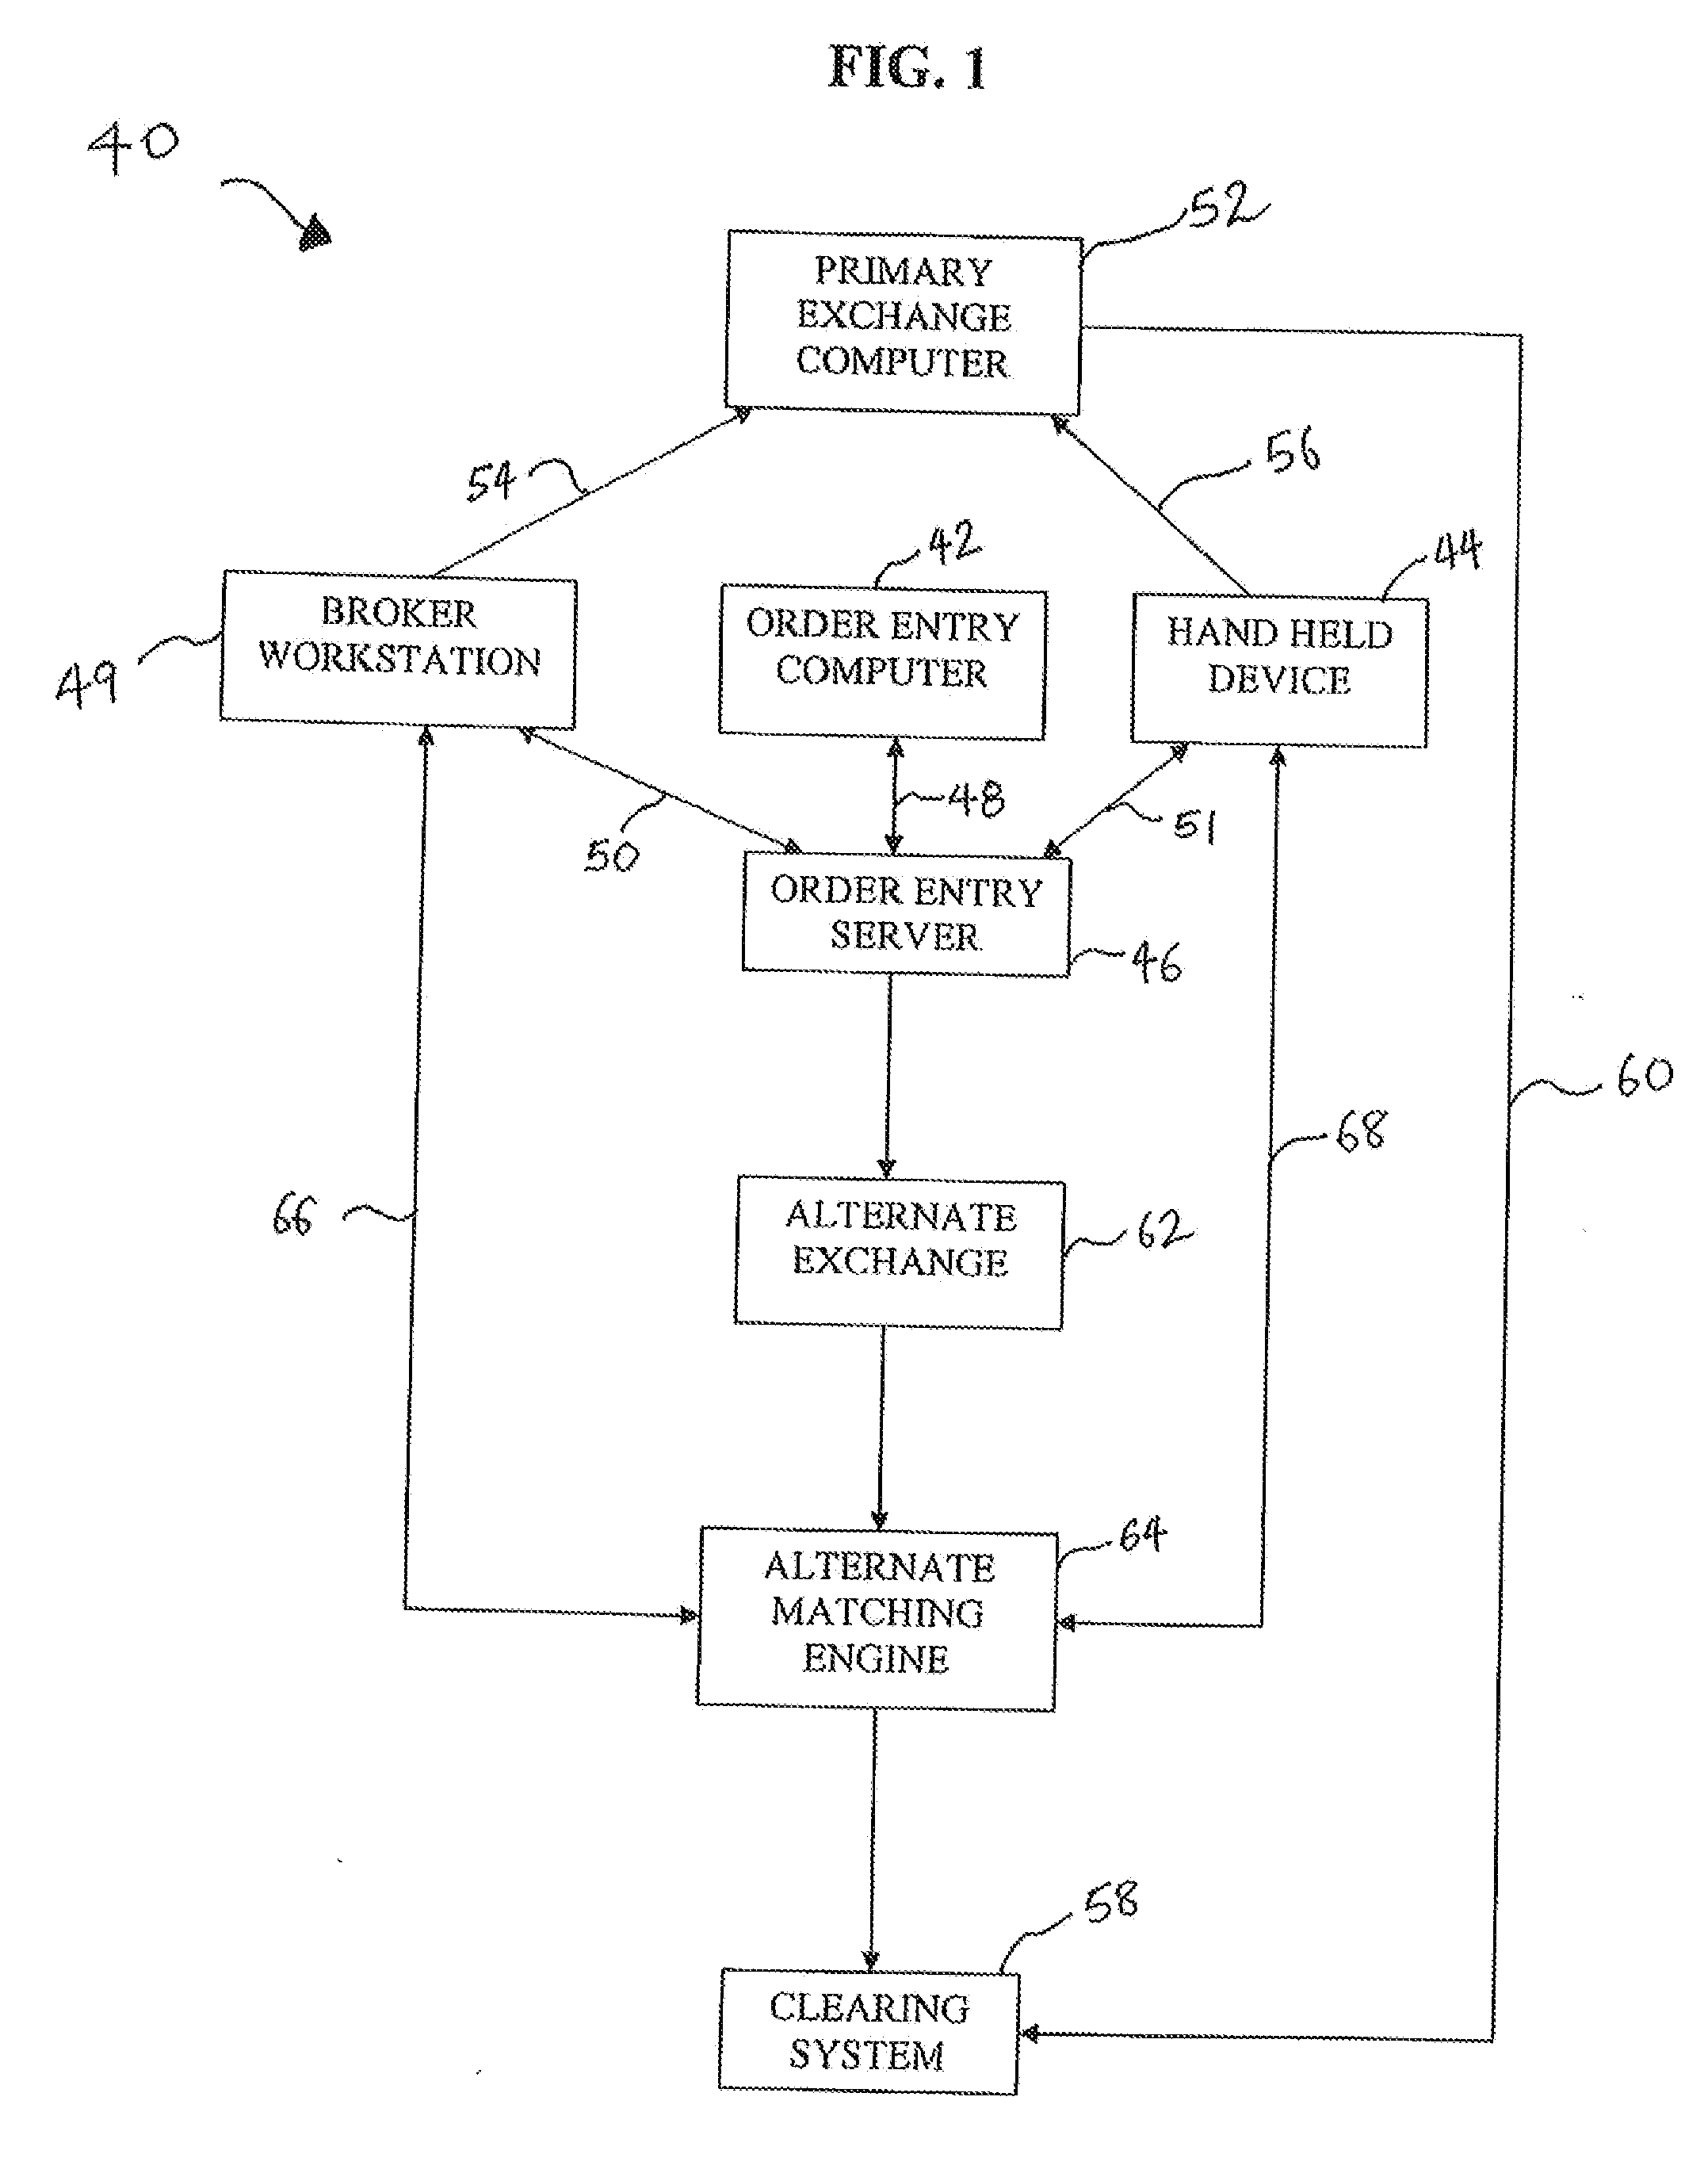 Method and System for Improving Exchange Performance